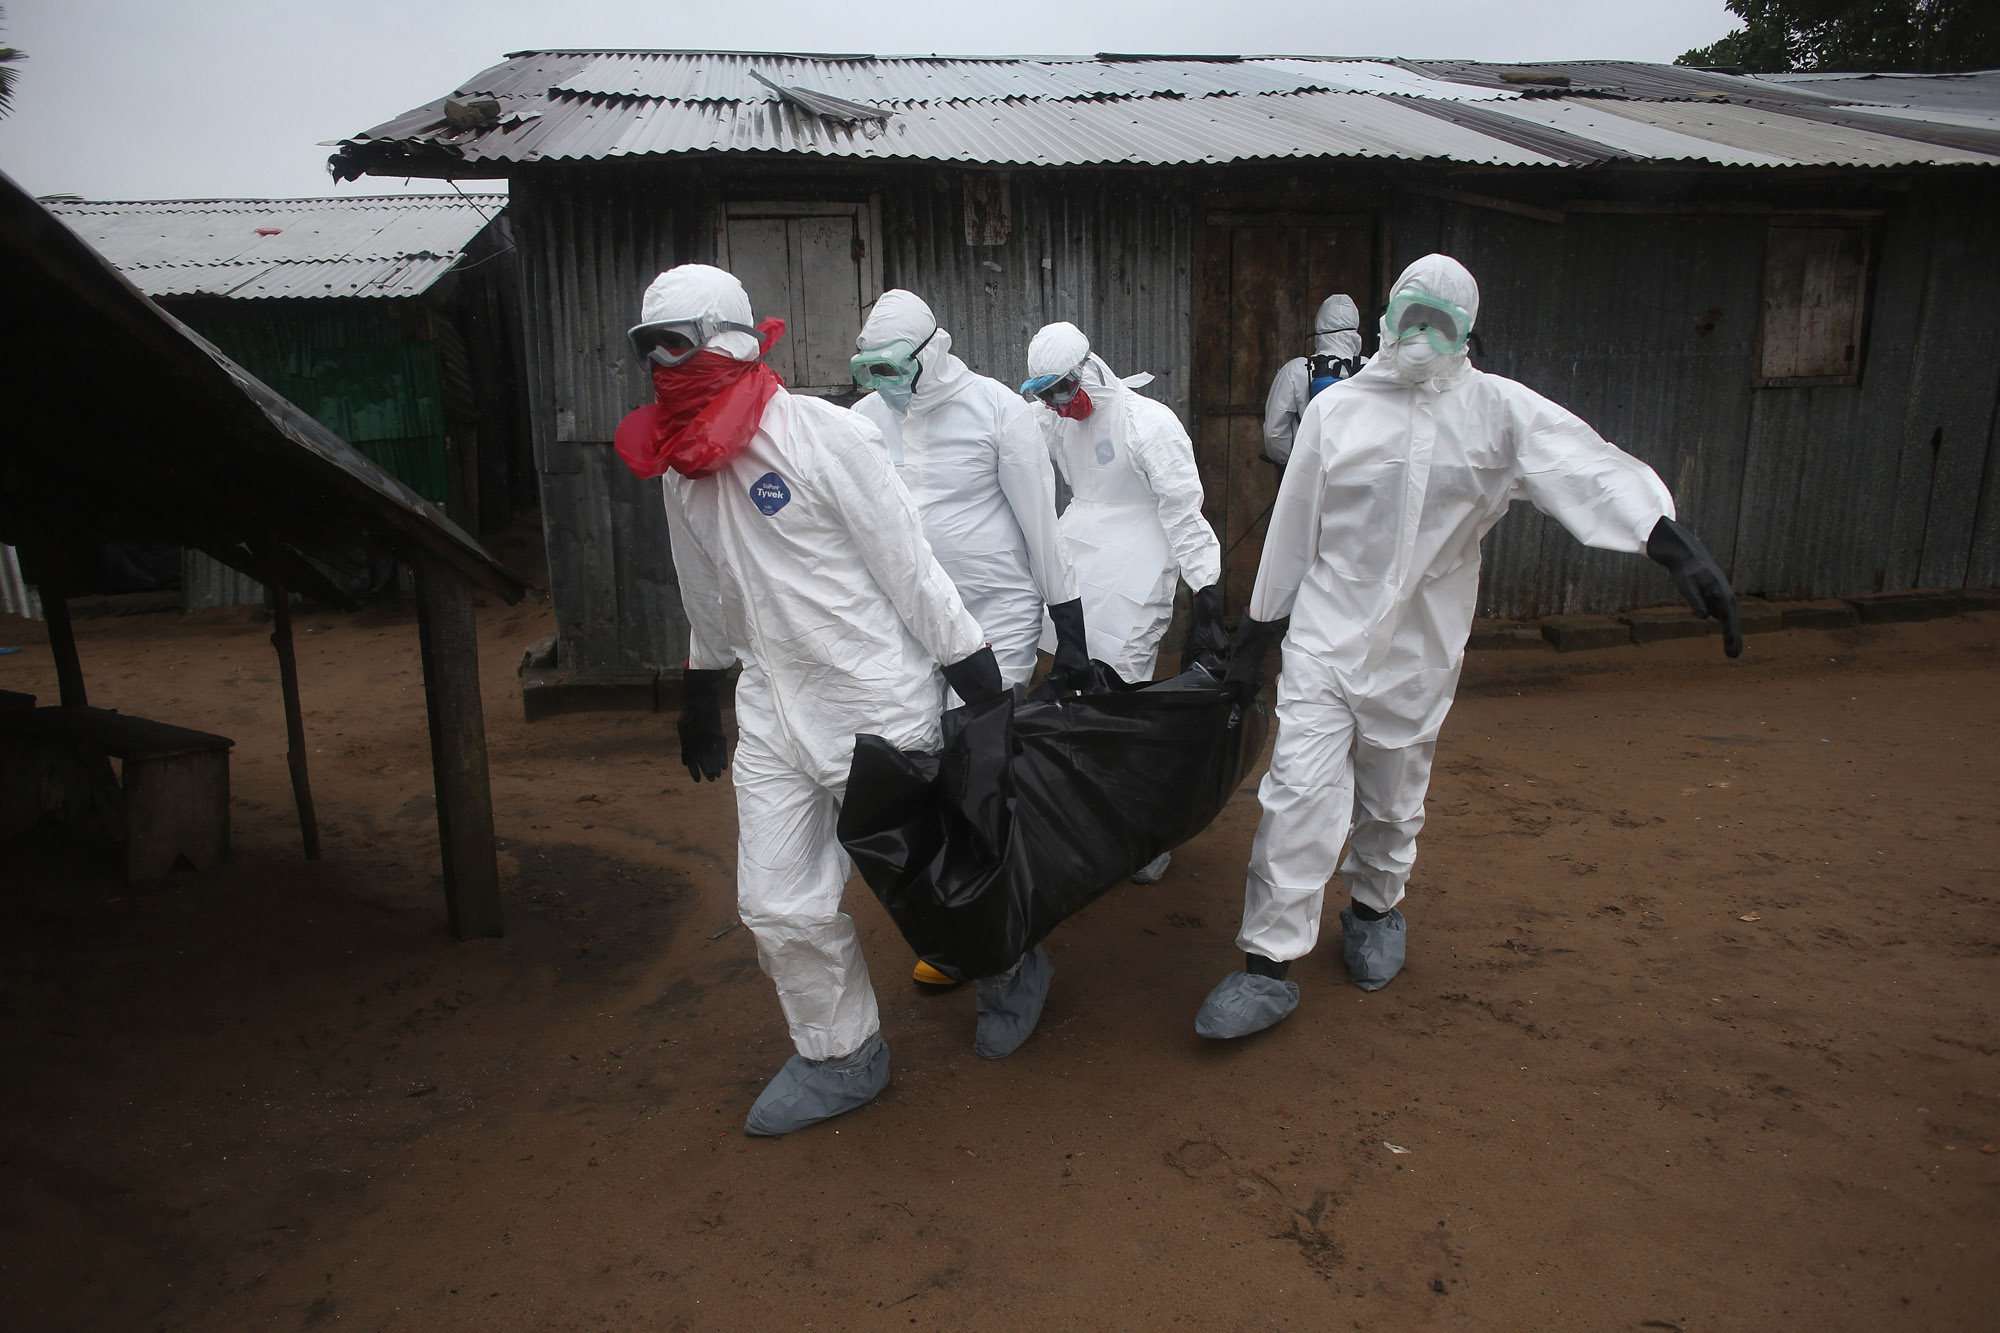 A Liberian burial team wearing protective clothing retrieves the body of a 60-year-old Ebola victim from his home on Aug. 17, 2014 near Monrovia, Liberia.